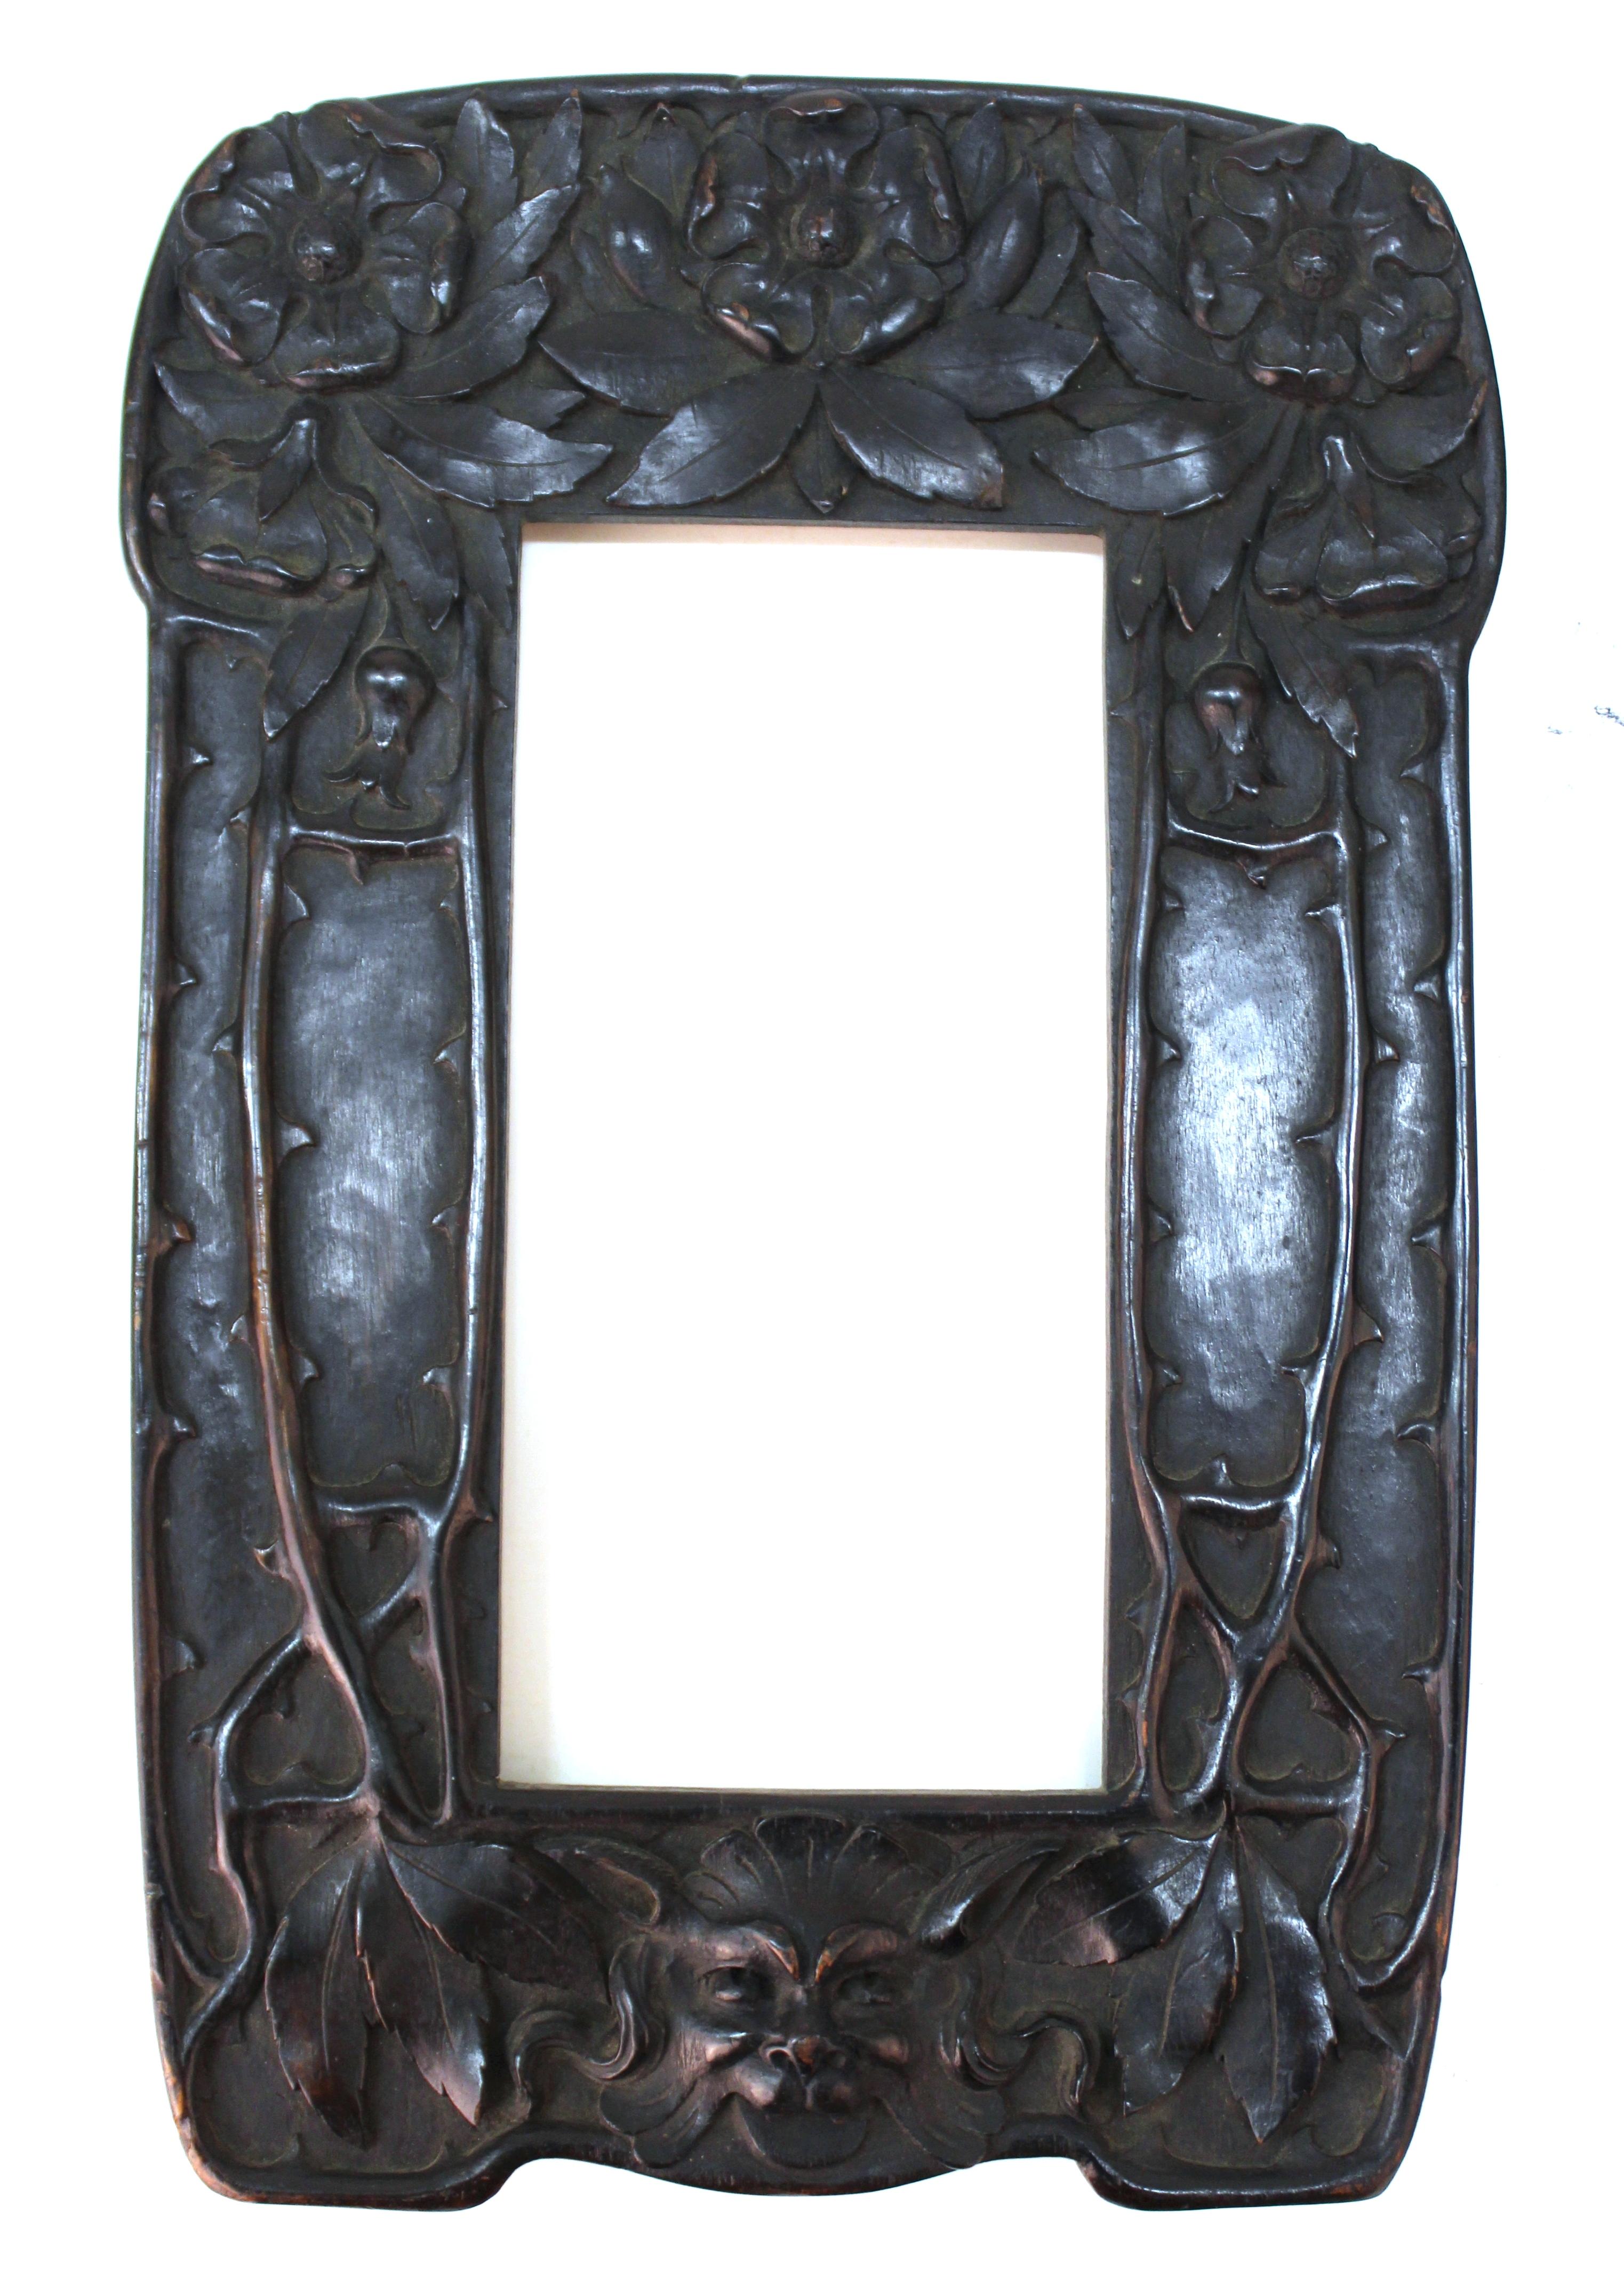 Italian Art Nouveau mirror with an elaborately carved wood frame, created by Cutler & Girard in Italy. The frame has carved roses on the upper part, thorns on the sides and the head of a grotesque on the bottom part. The piece has a makers label on